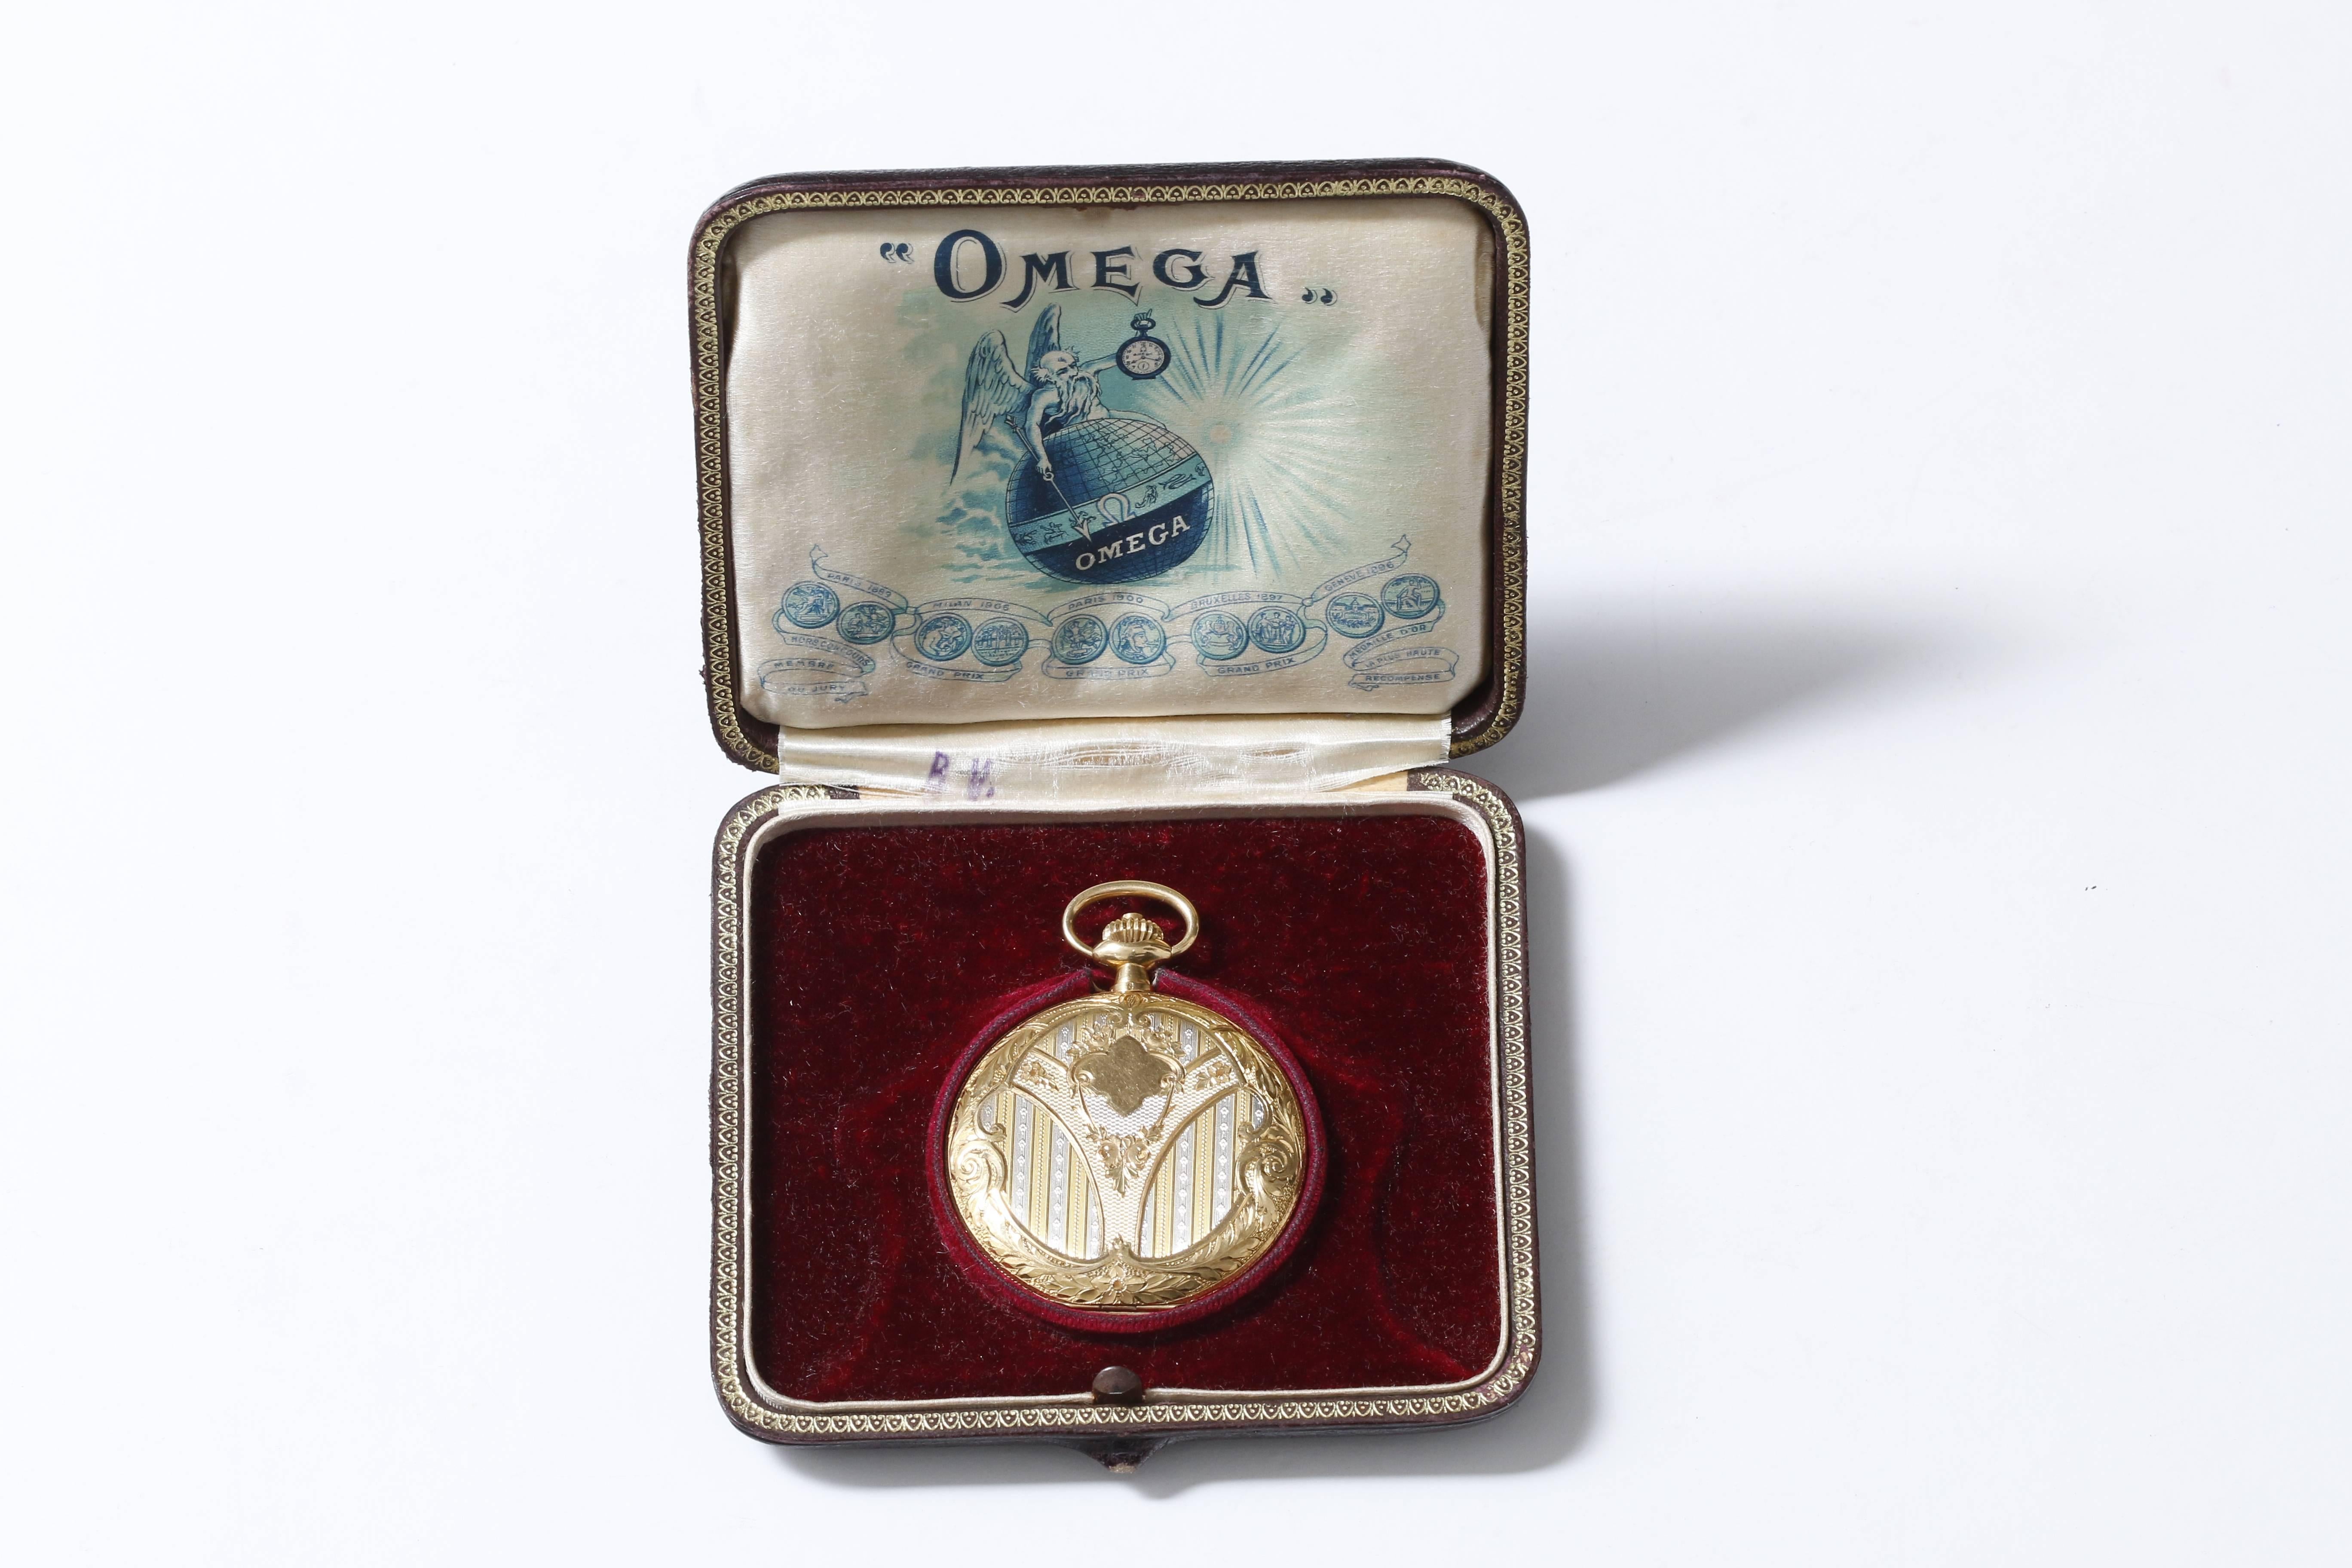 Omega Engraved Yellow Gold Pocket Watch in Original Box 1